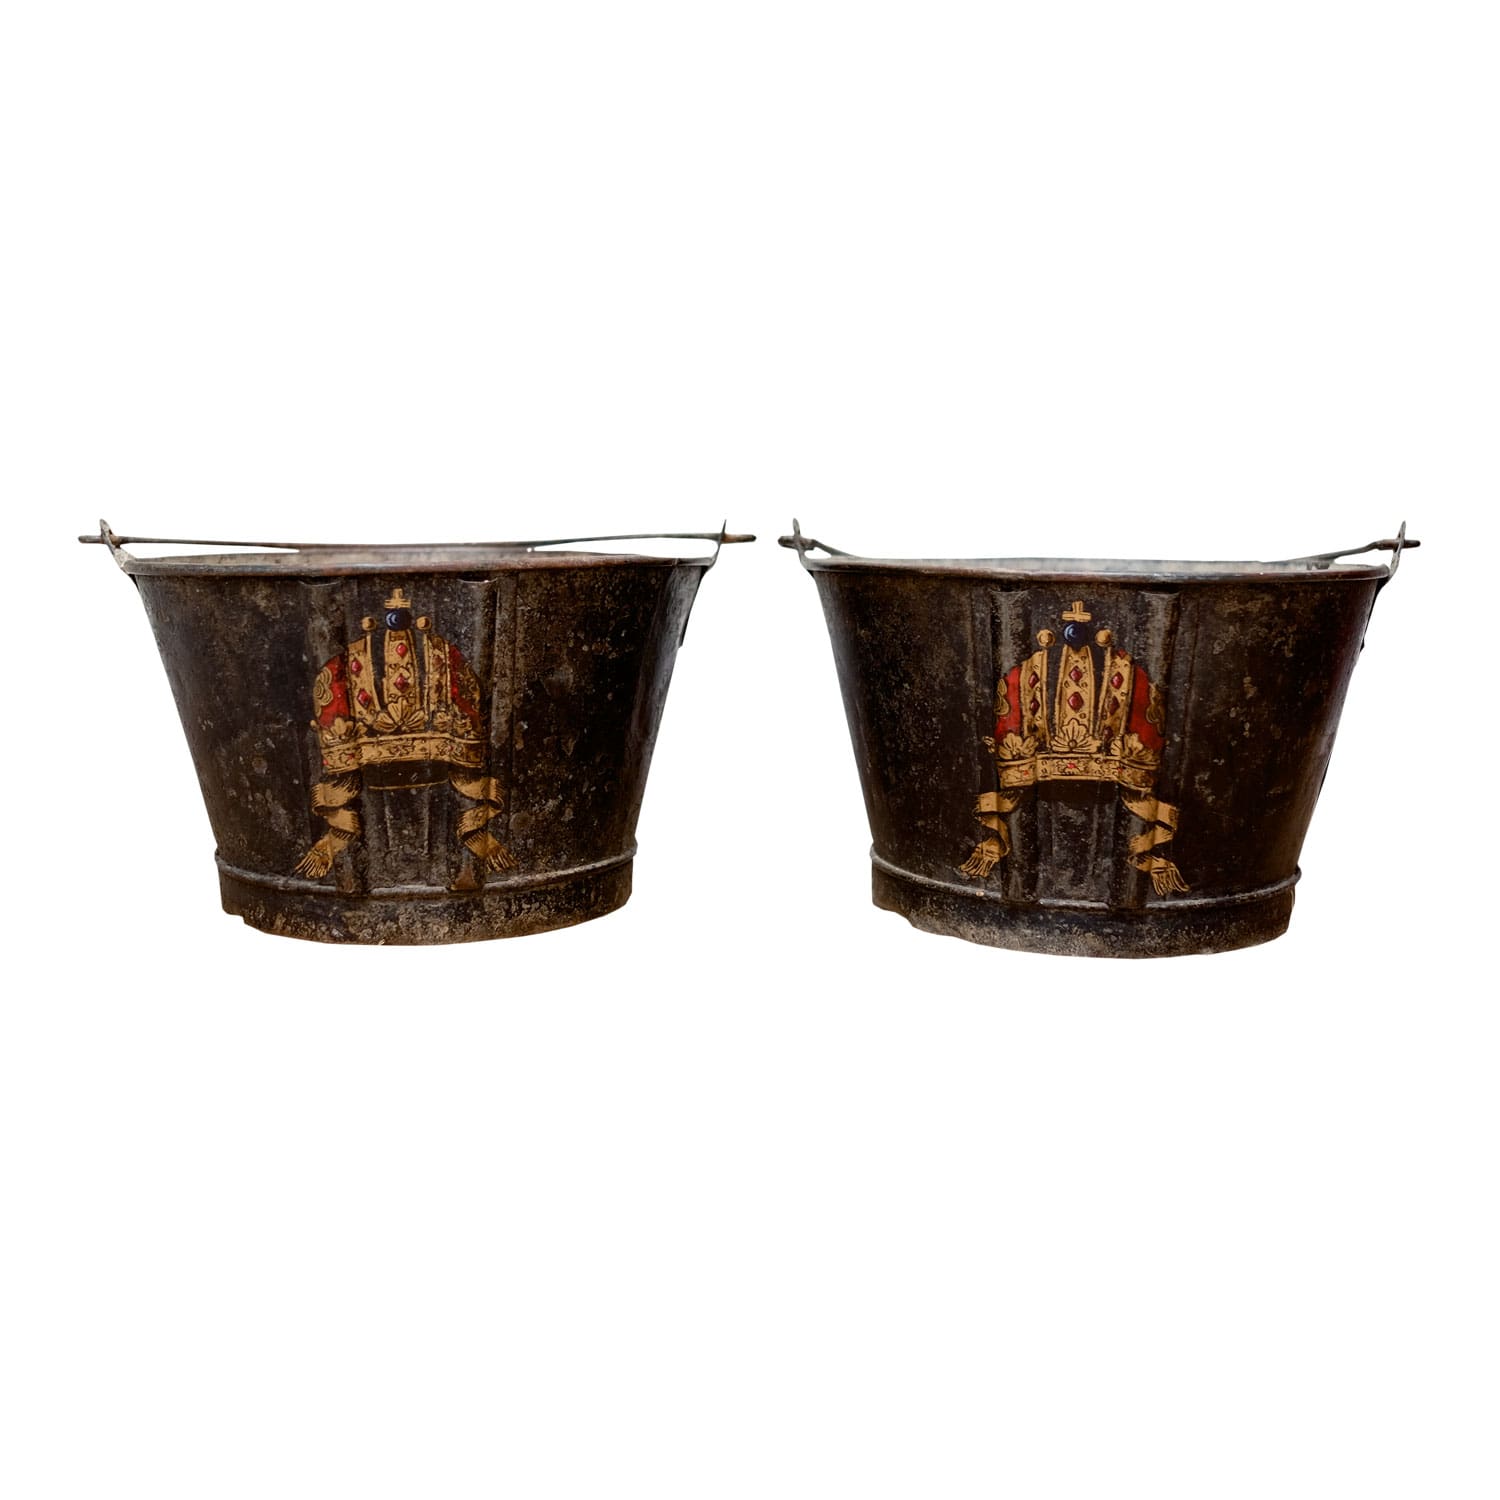 Pair of Antique Fire Buckets